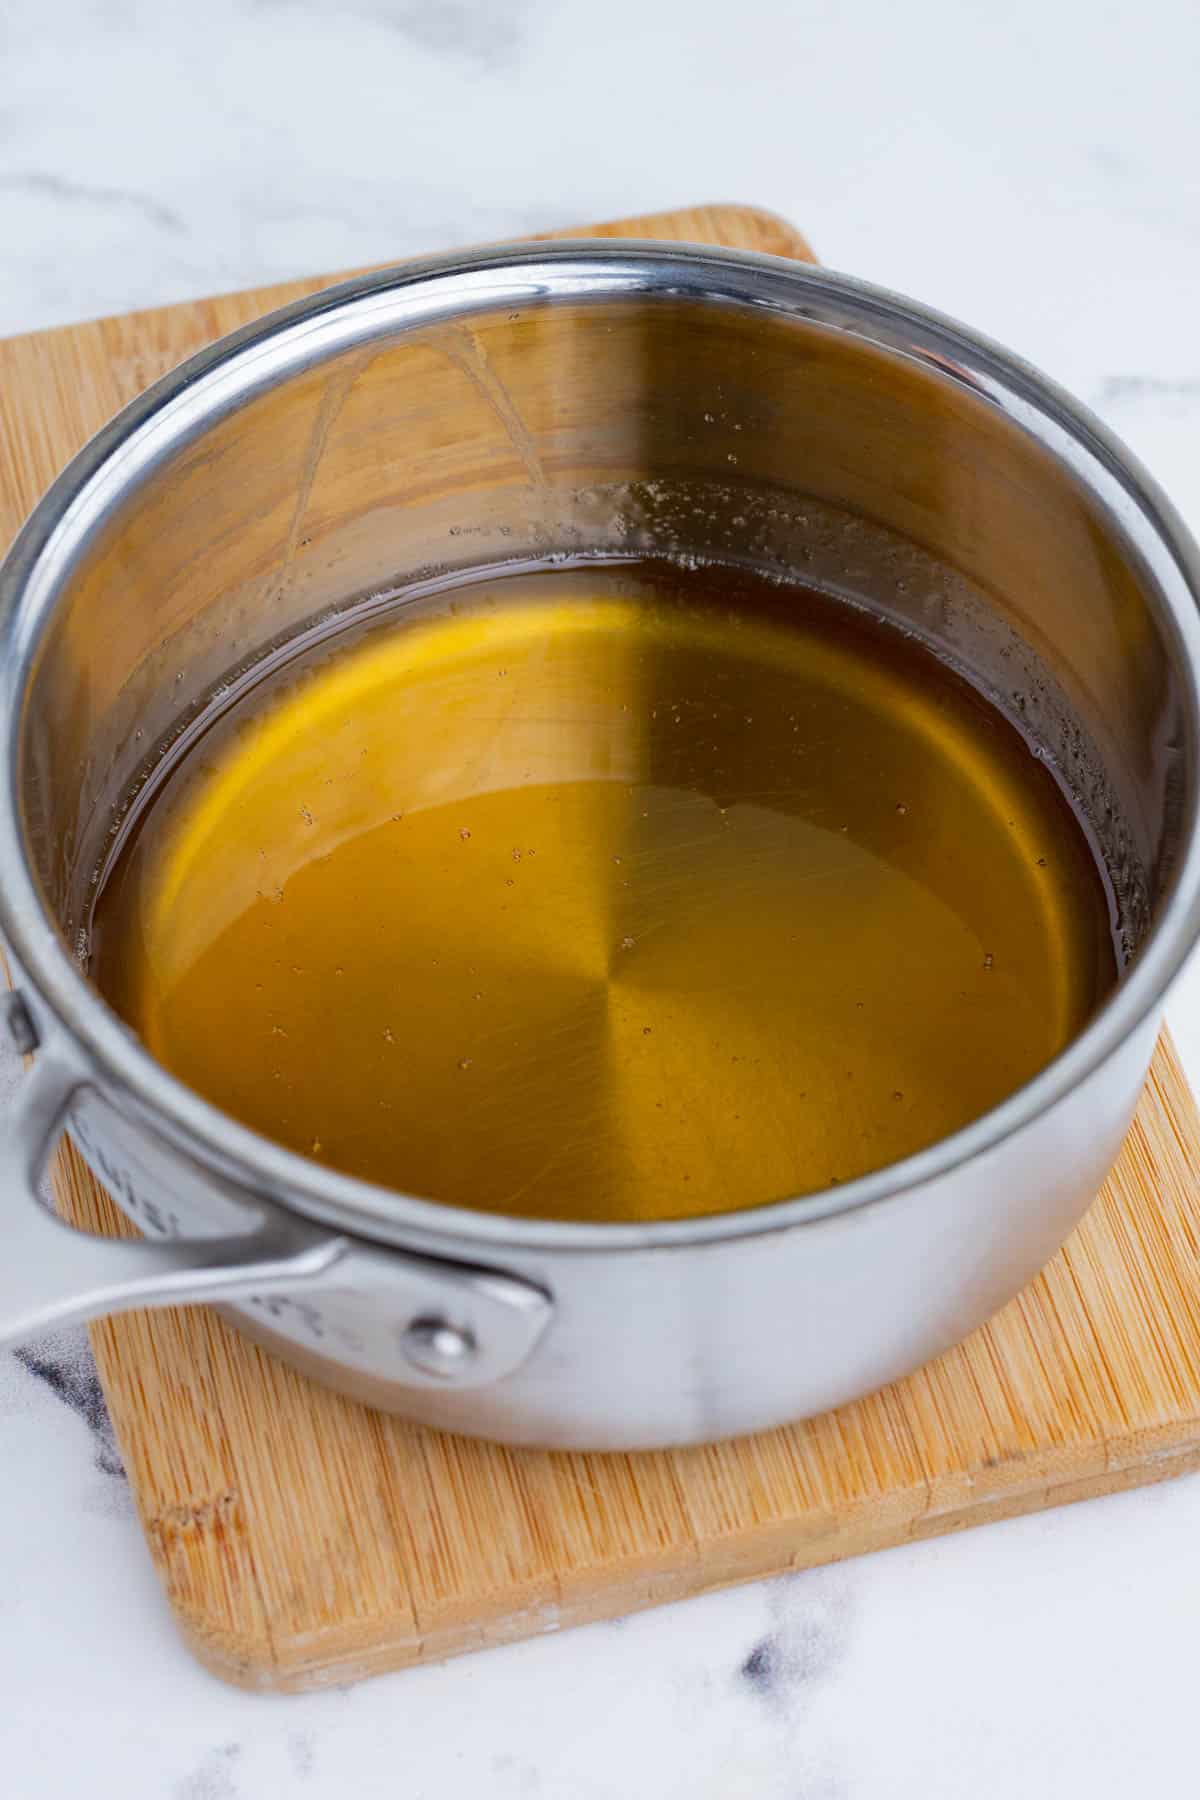 Boiled honey is removed from the heat.